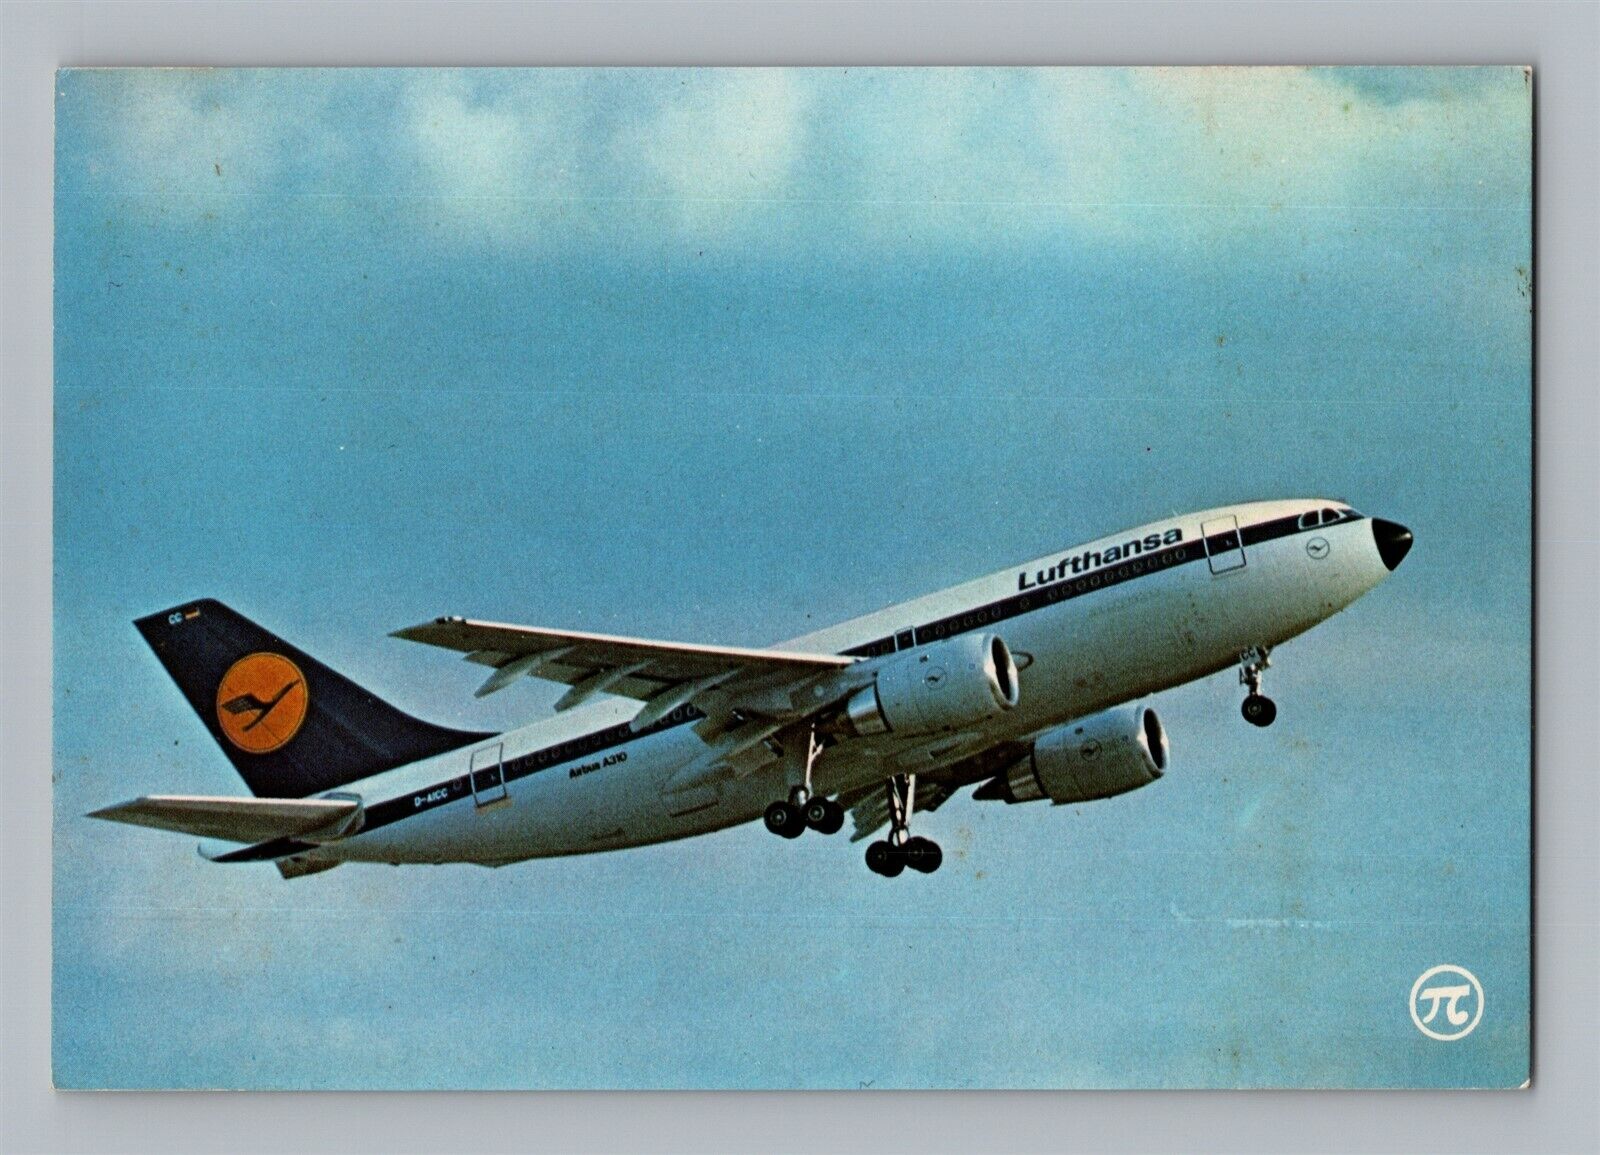 Aviation Airplane Postcard Lufthansa Airlines Airbus A310 Take Off Landing P5